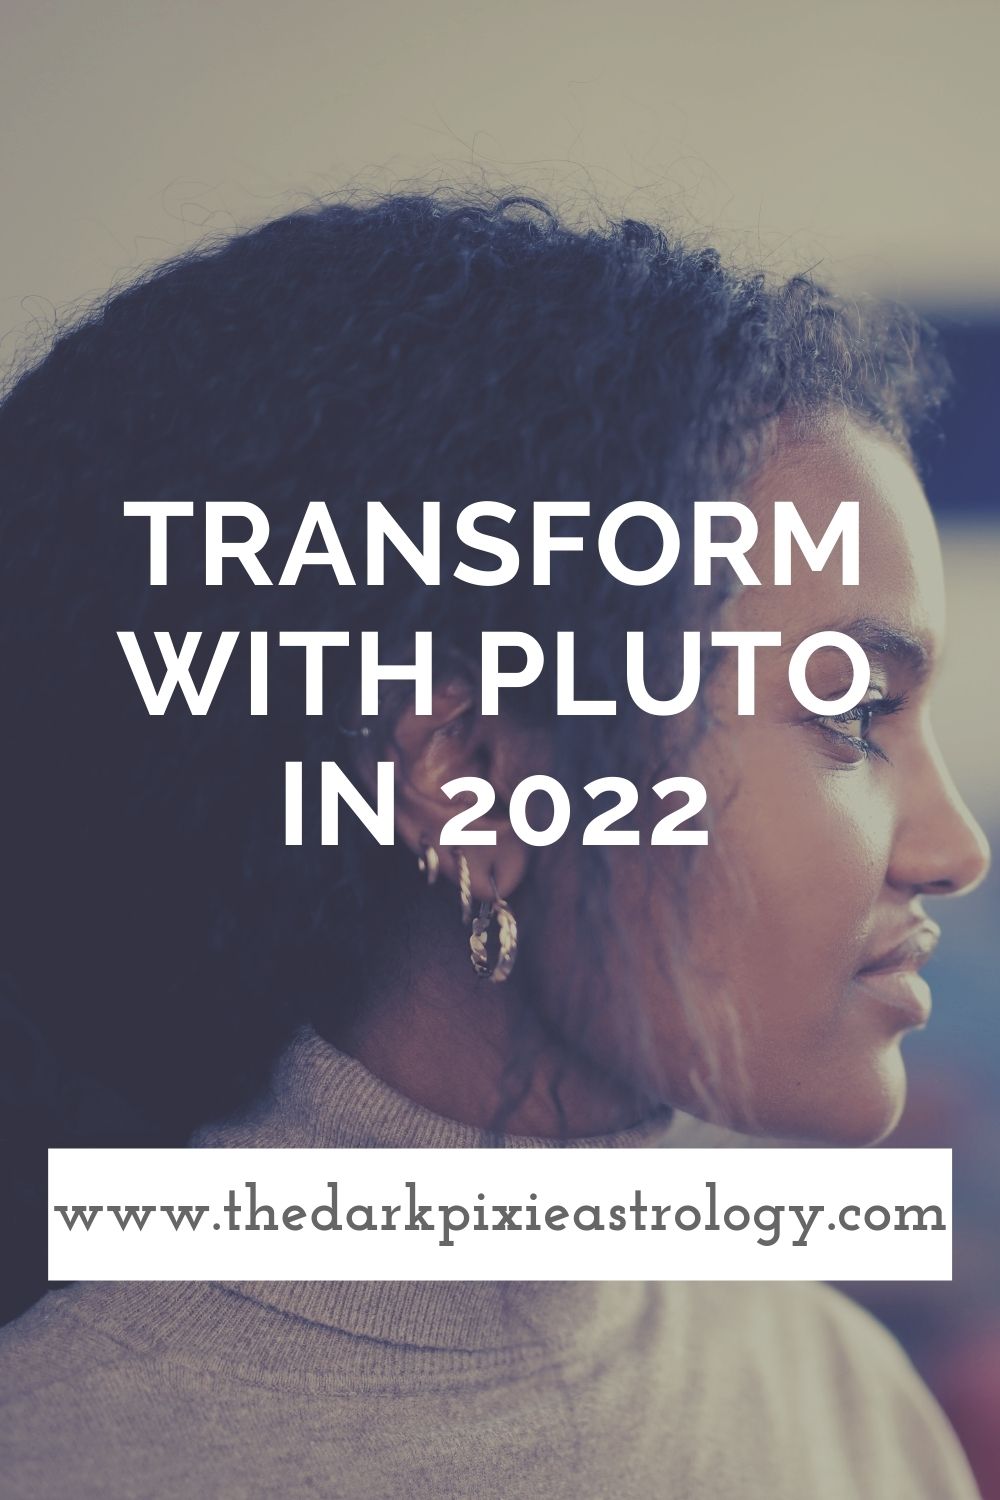 Transform With Pluto in 2022 - The Dark Pixie Astrology